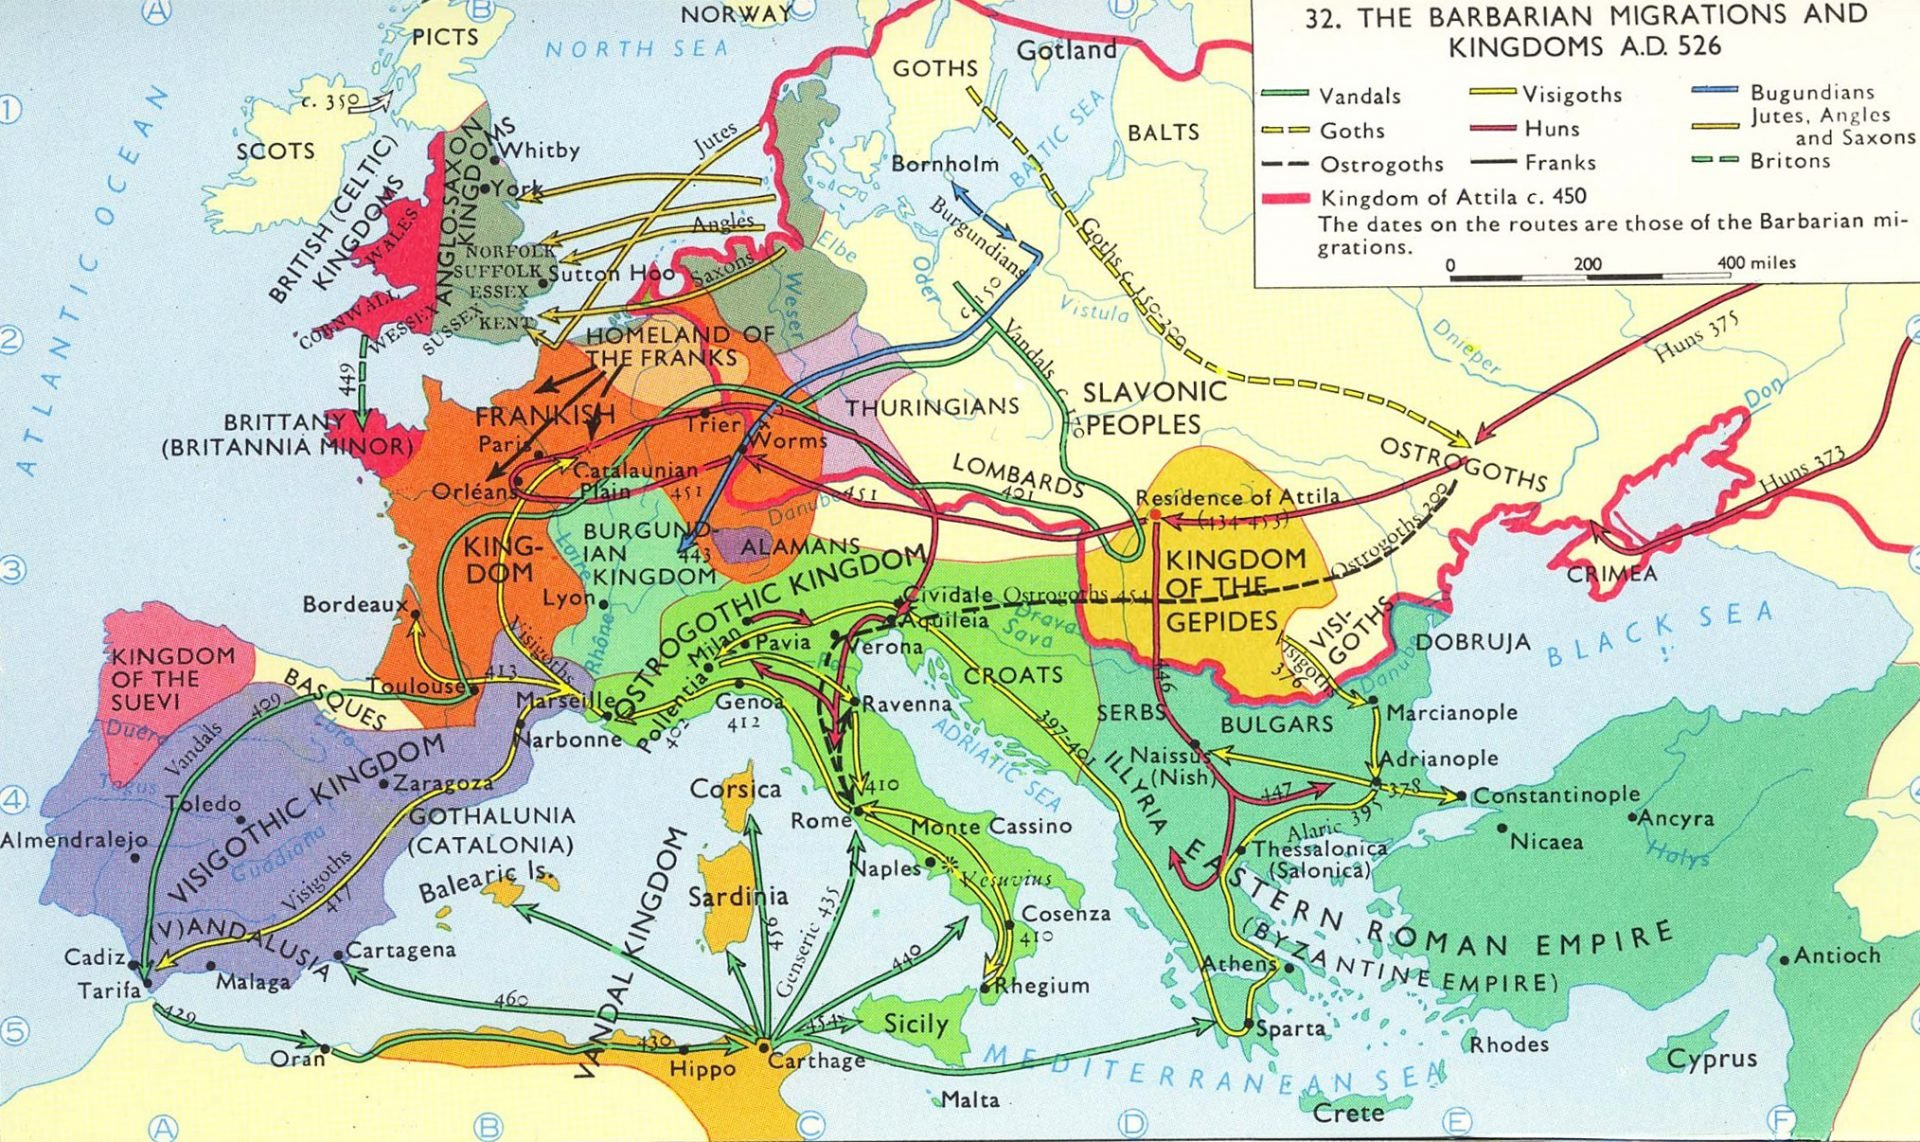 A map of Europe and the Mediterranean Sea showing the migration of barbarian tribes in the 4th and 5th centuries. The map is color-coded to show the different tribes and their routes. The map is titled “The Barbarian Migrations and Kingdoms AD 526”. The map shows the routes of the Goths, Franks, Burgundians, Vandals, Visigoths, Ostrogoths, and Huns. The map also shows the locations of the Eastern Roman Empire. The map is labeled with the names of cities, regions, and bodies of water.